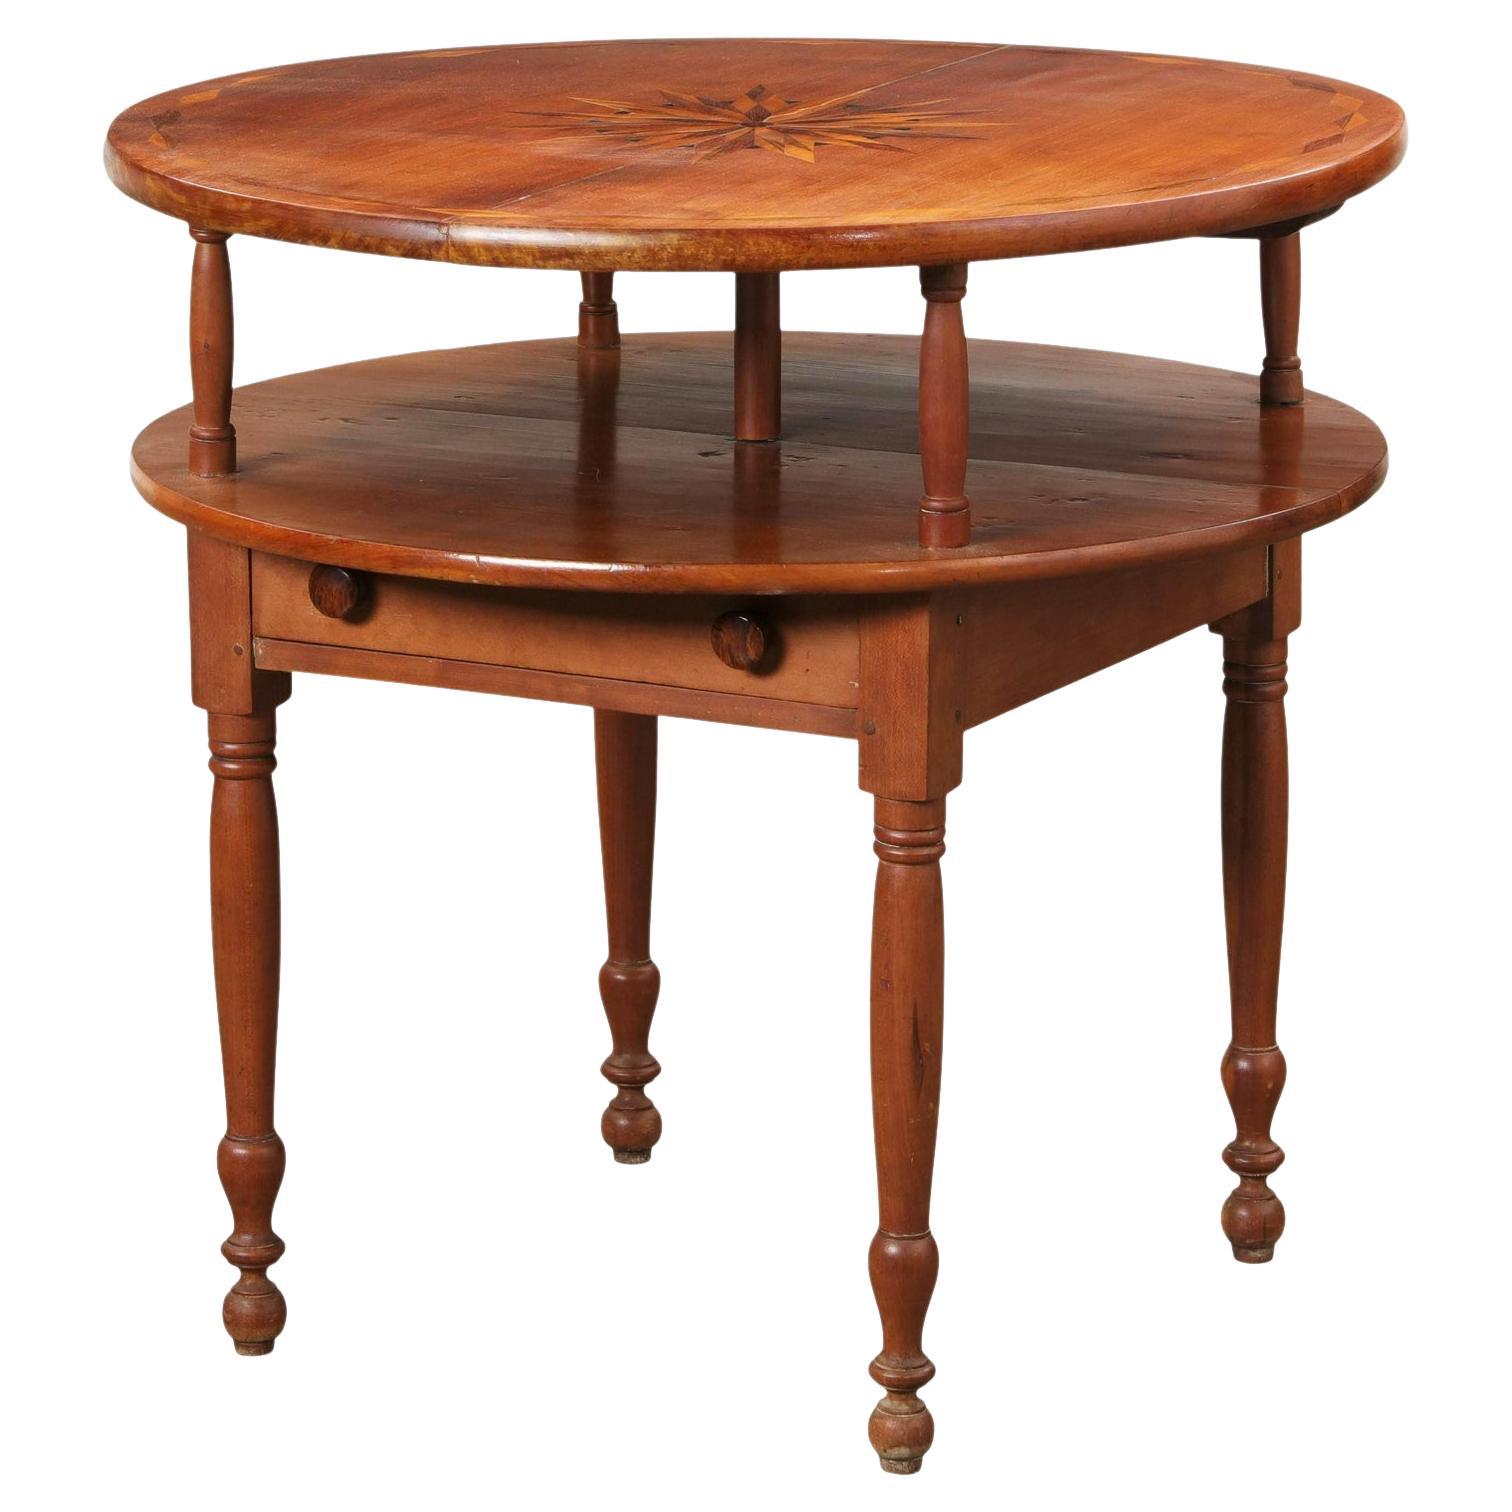 Antique Early 19th Century American Sheraton Inlaid Cherry Table For Sale